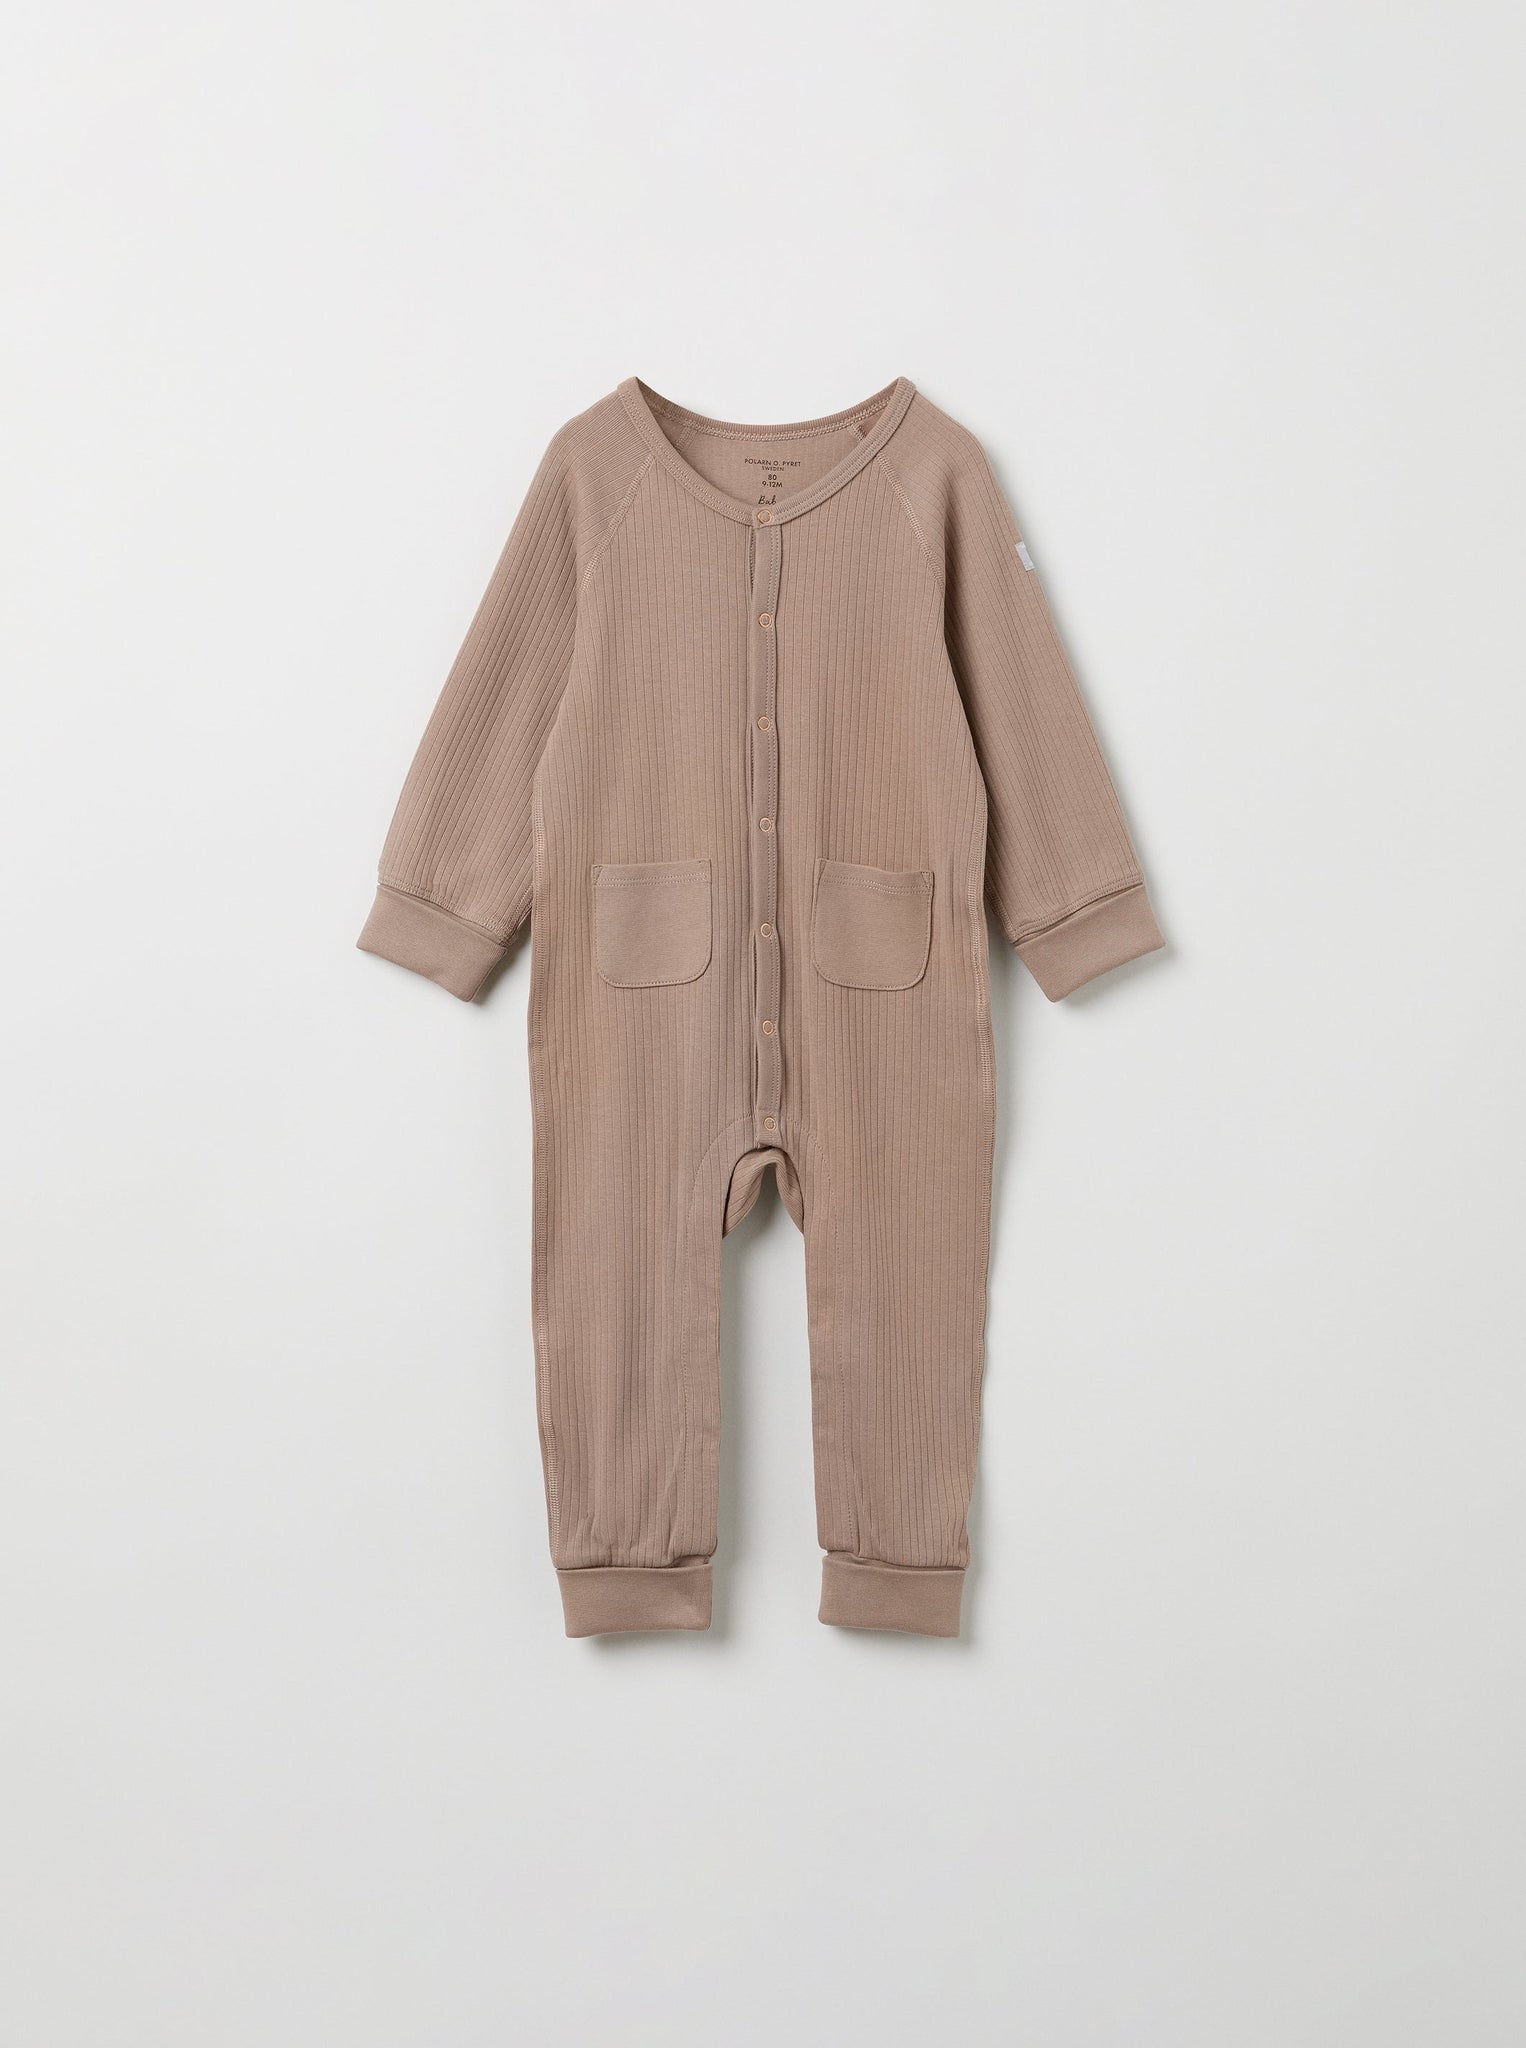 Organic Cotton Brown Baby Romper from the Polarn O. Pyret babywear collection. The best ethical kids clothes